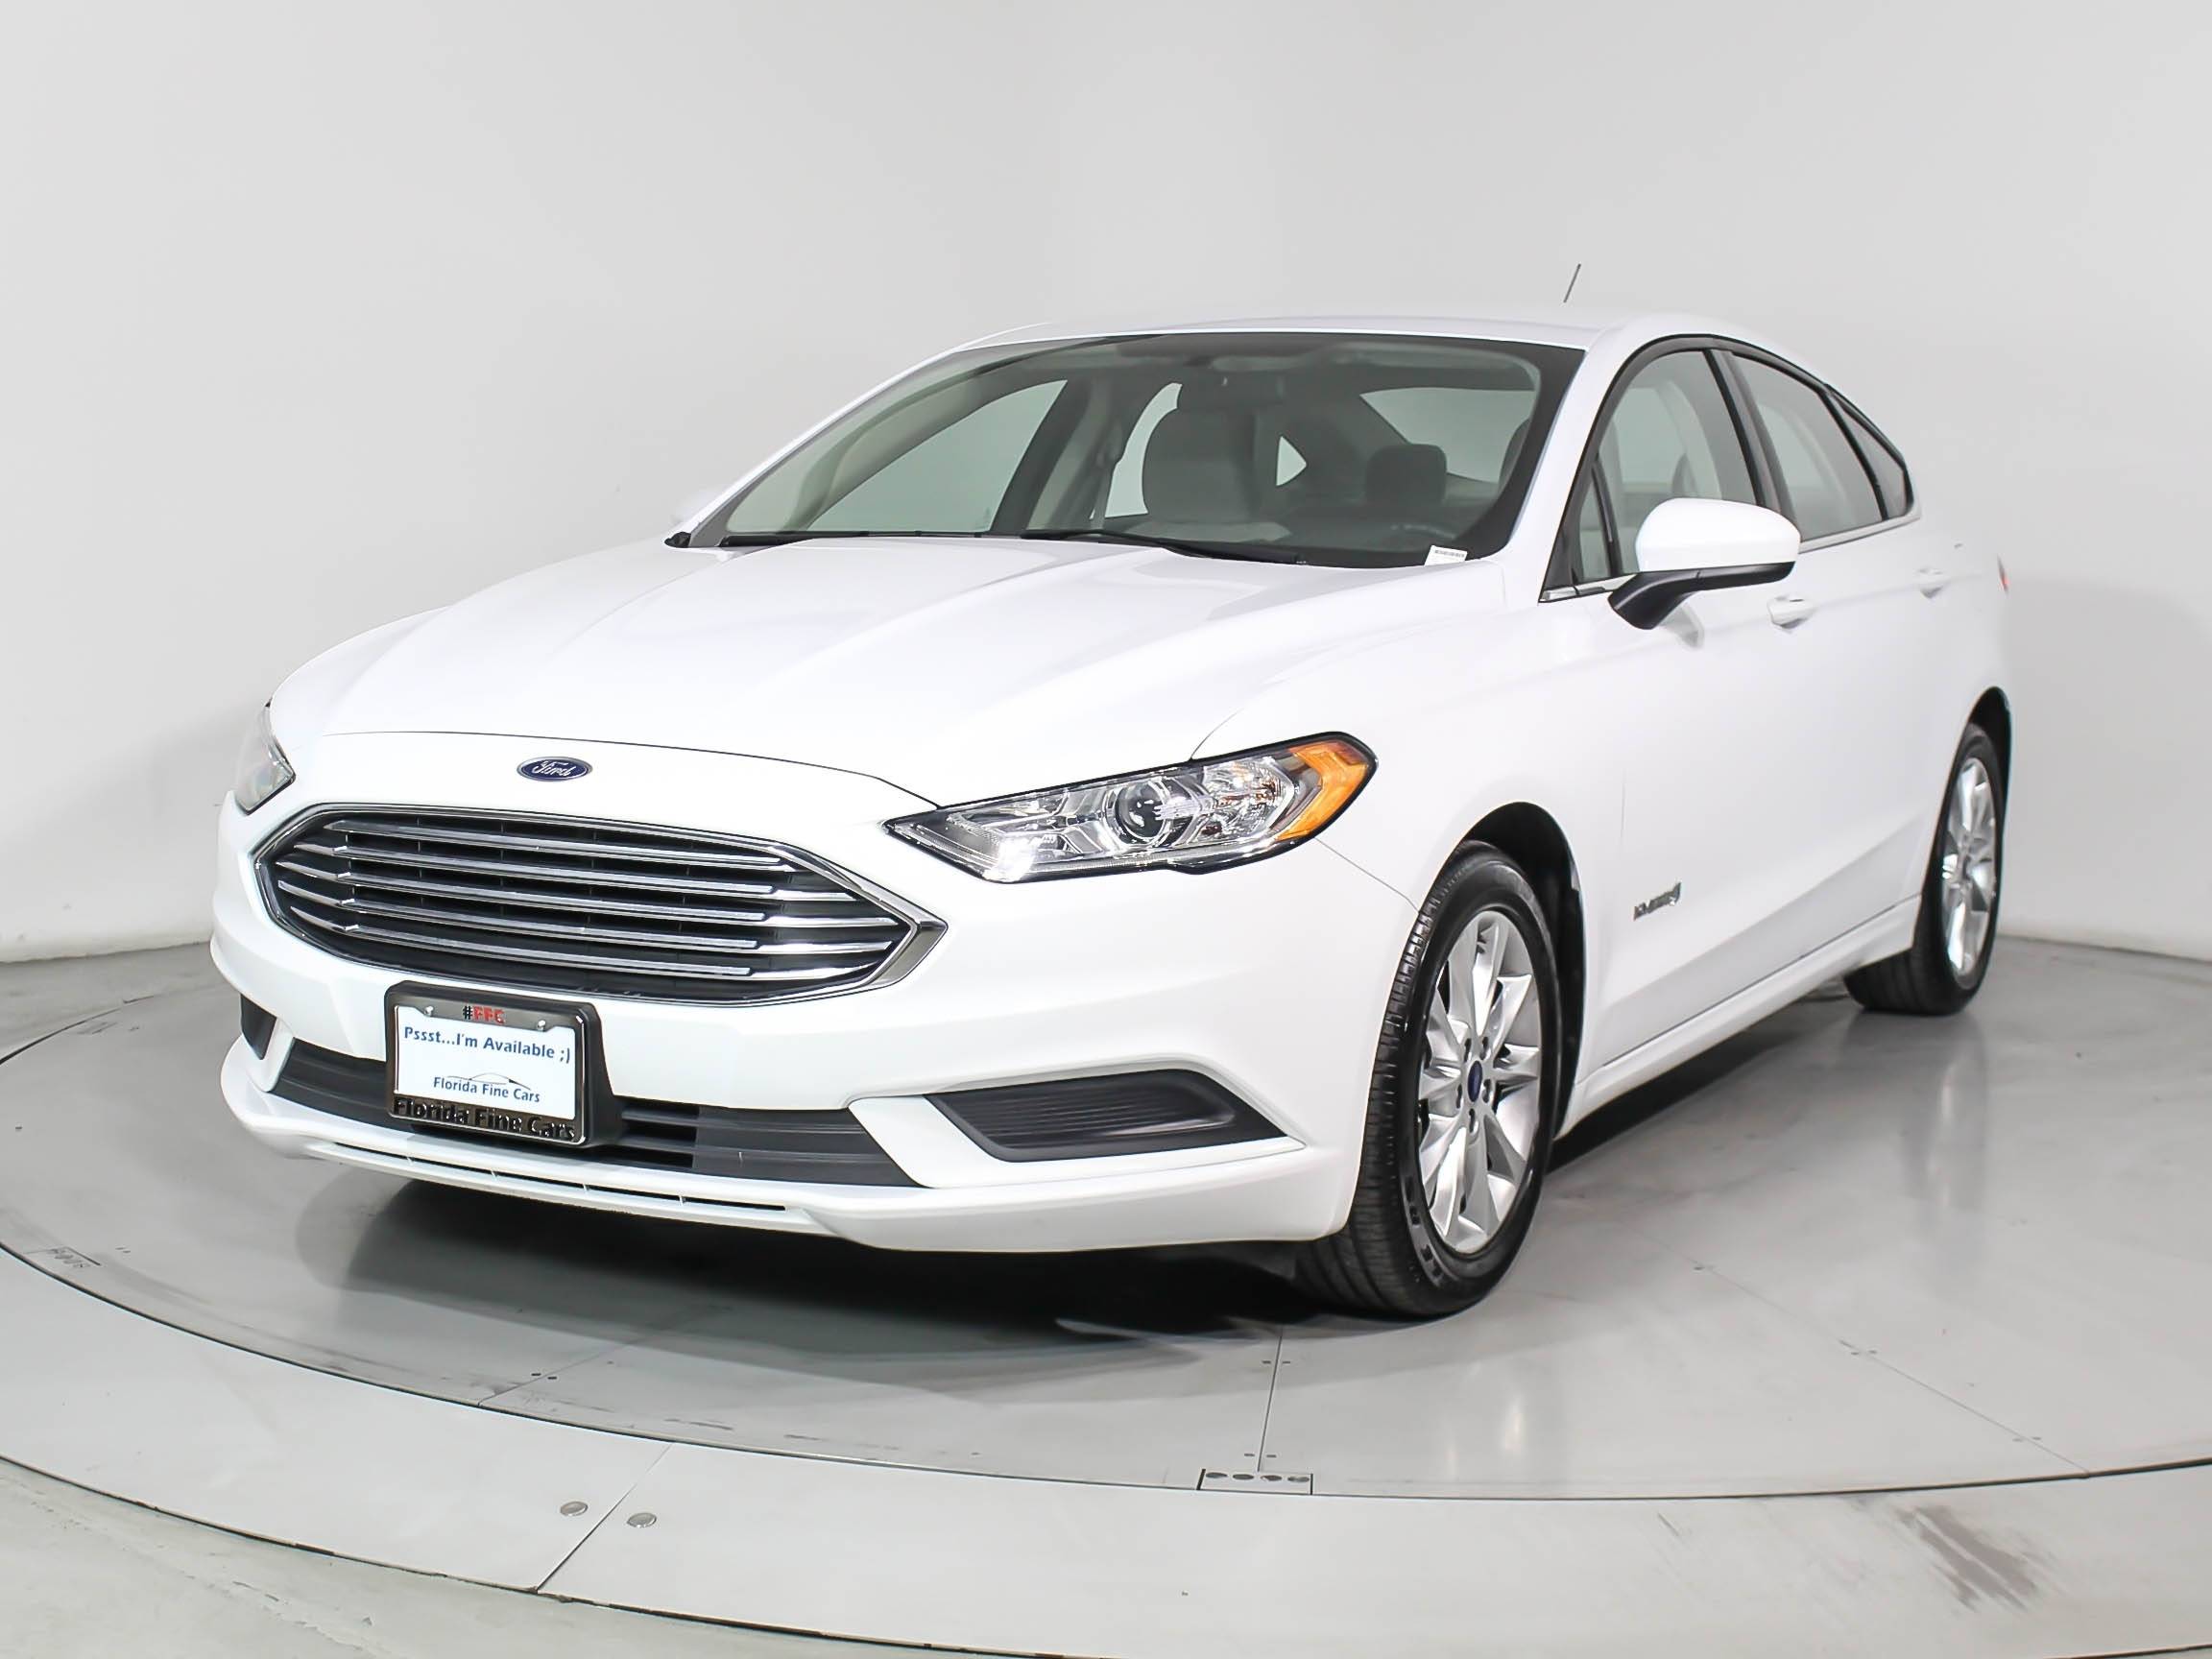 Used 2017 FORD FUSION SE HYBRID for sale in HOLLYWOOD | 103625